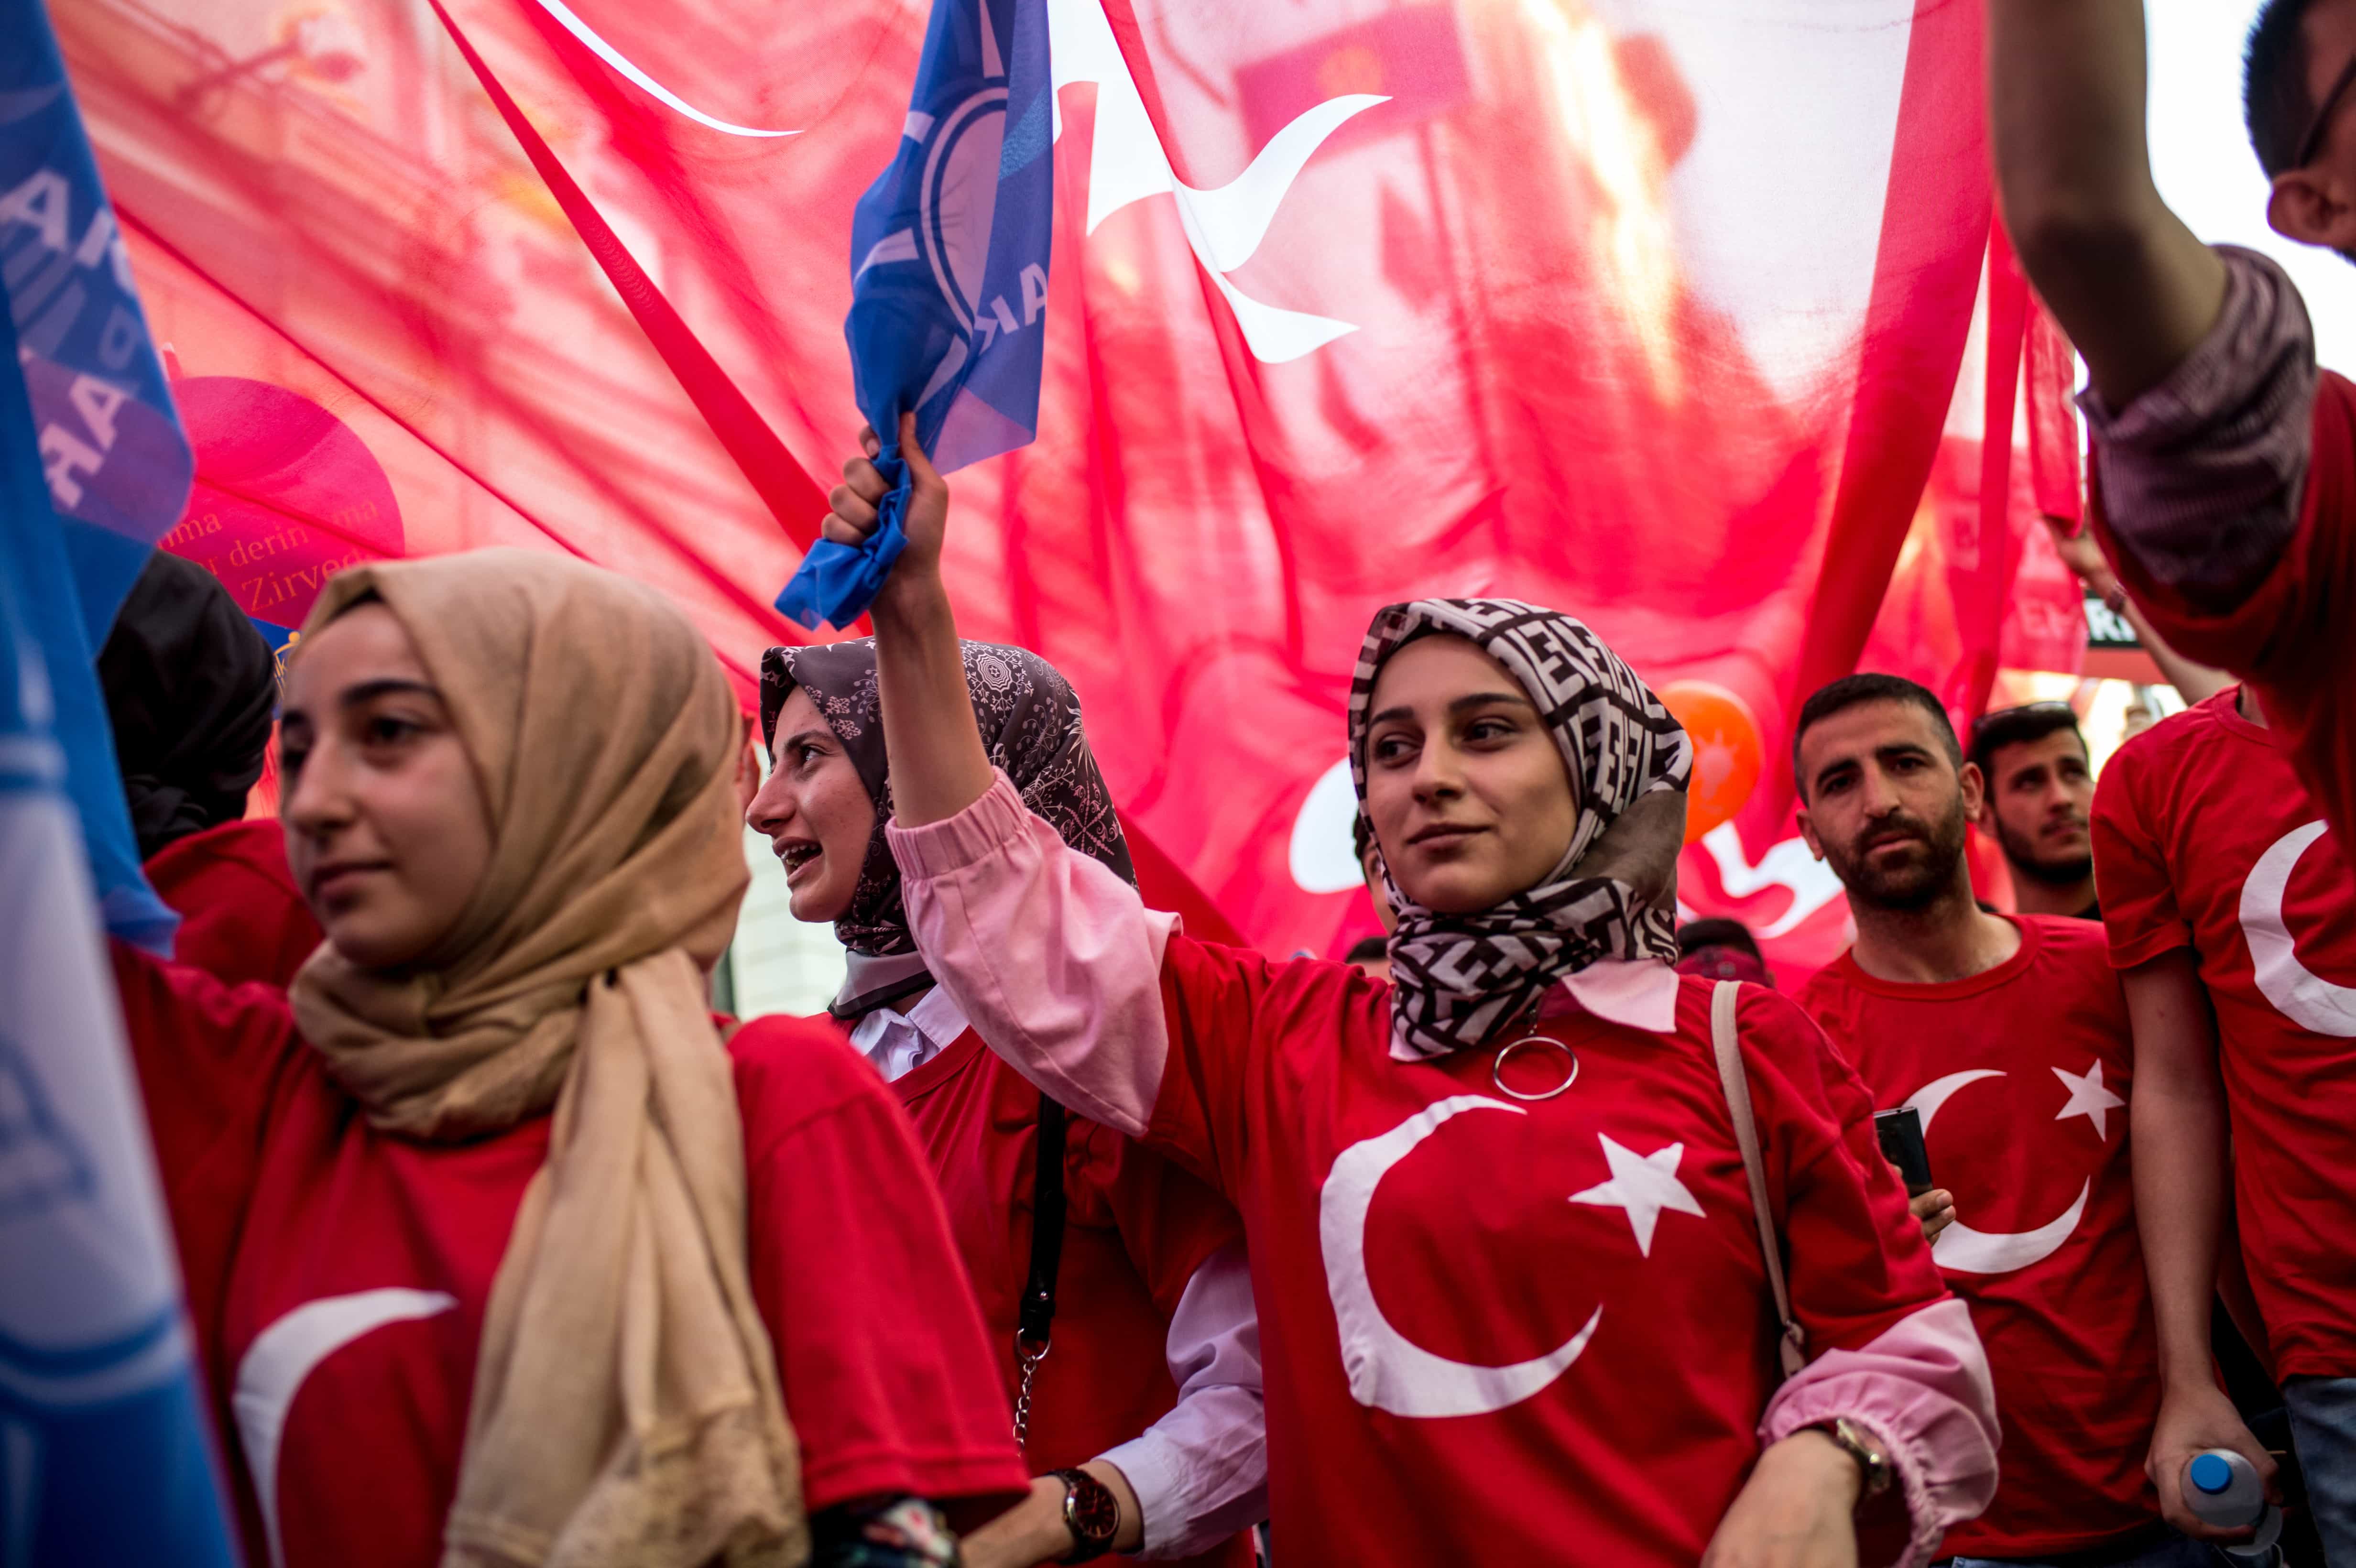 Supporters of the Turklish president wear T-shirts in the design of the national flag and carry a large flag during an election campaign rally for the AK Party in Istanbul, 20 June 2018, YASIN AKGUL/AFP/Getty Images